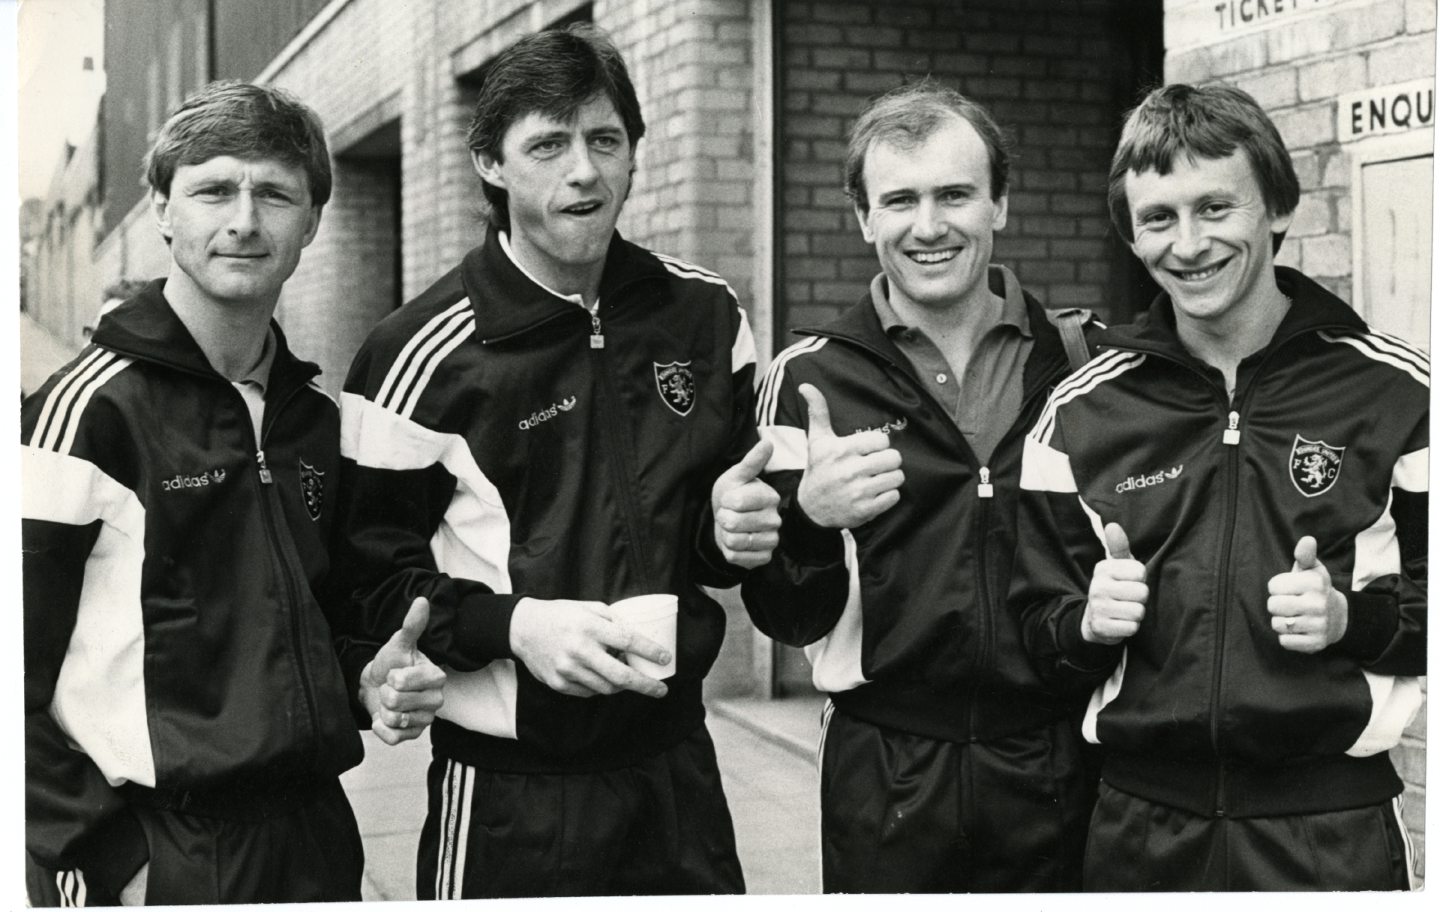 Paul Hegarty, Dave Narey, Eamonn Bannon and Paul Sturrock are pictured before leaving for Barcelona in 1987.